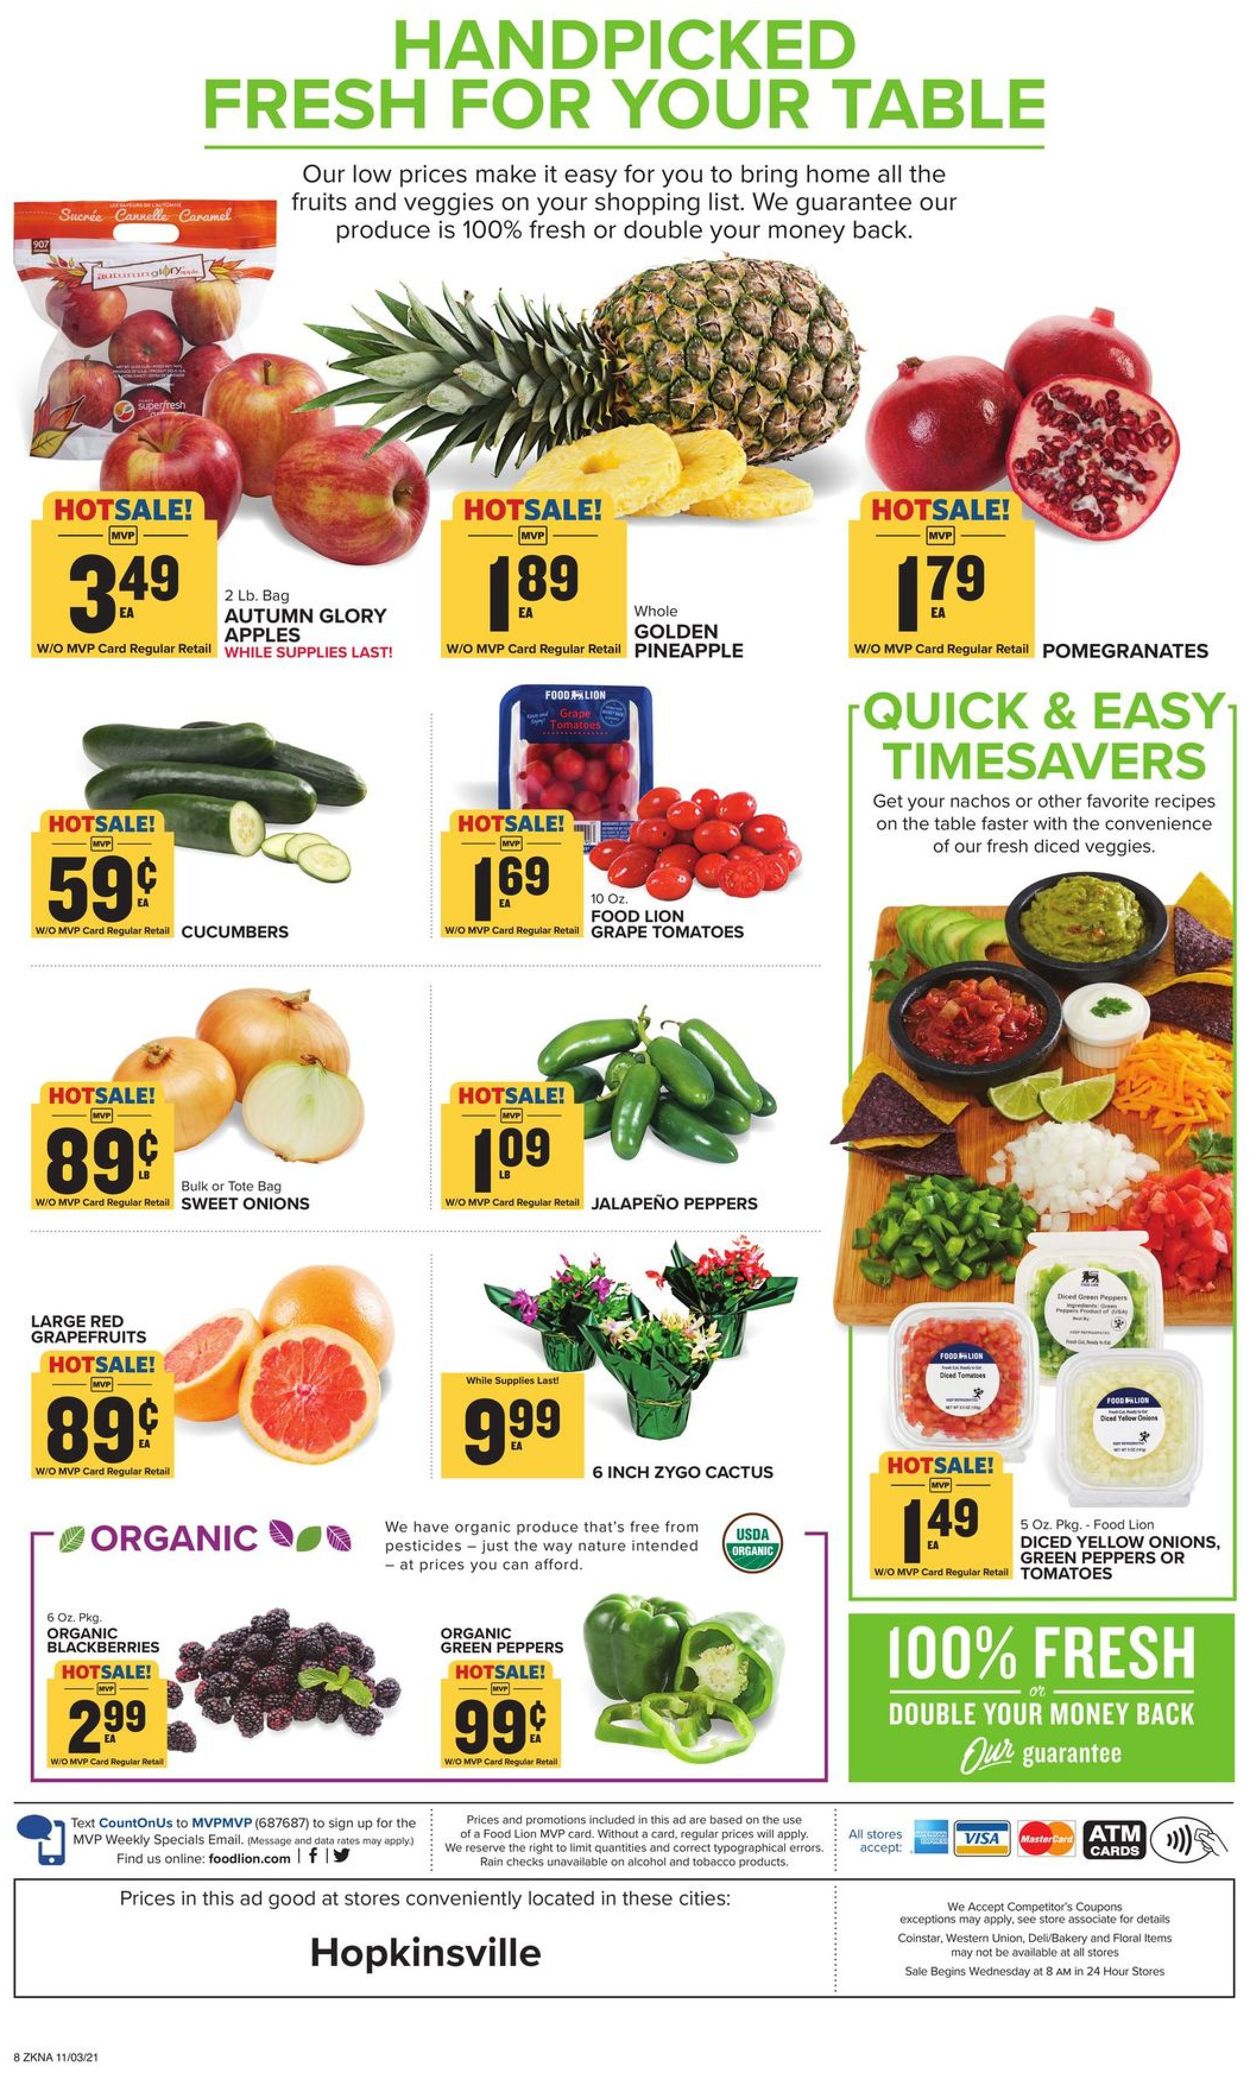 Food Lion Ad from 11/03/2021